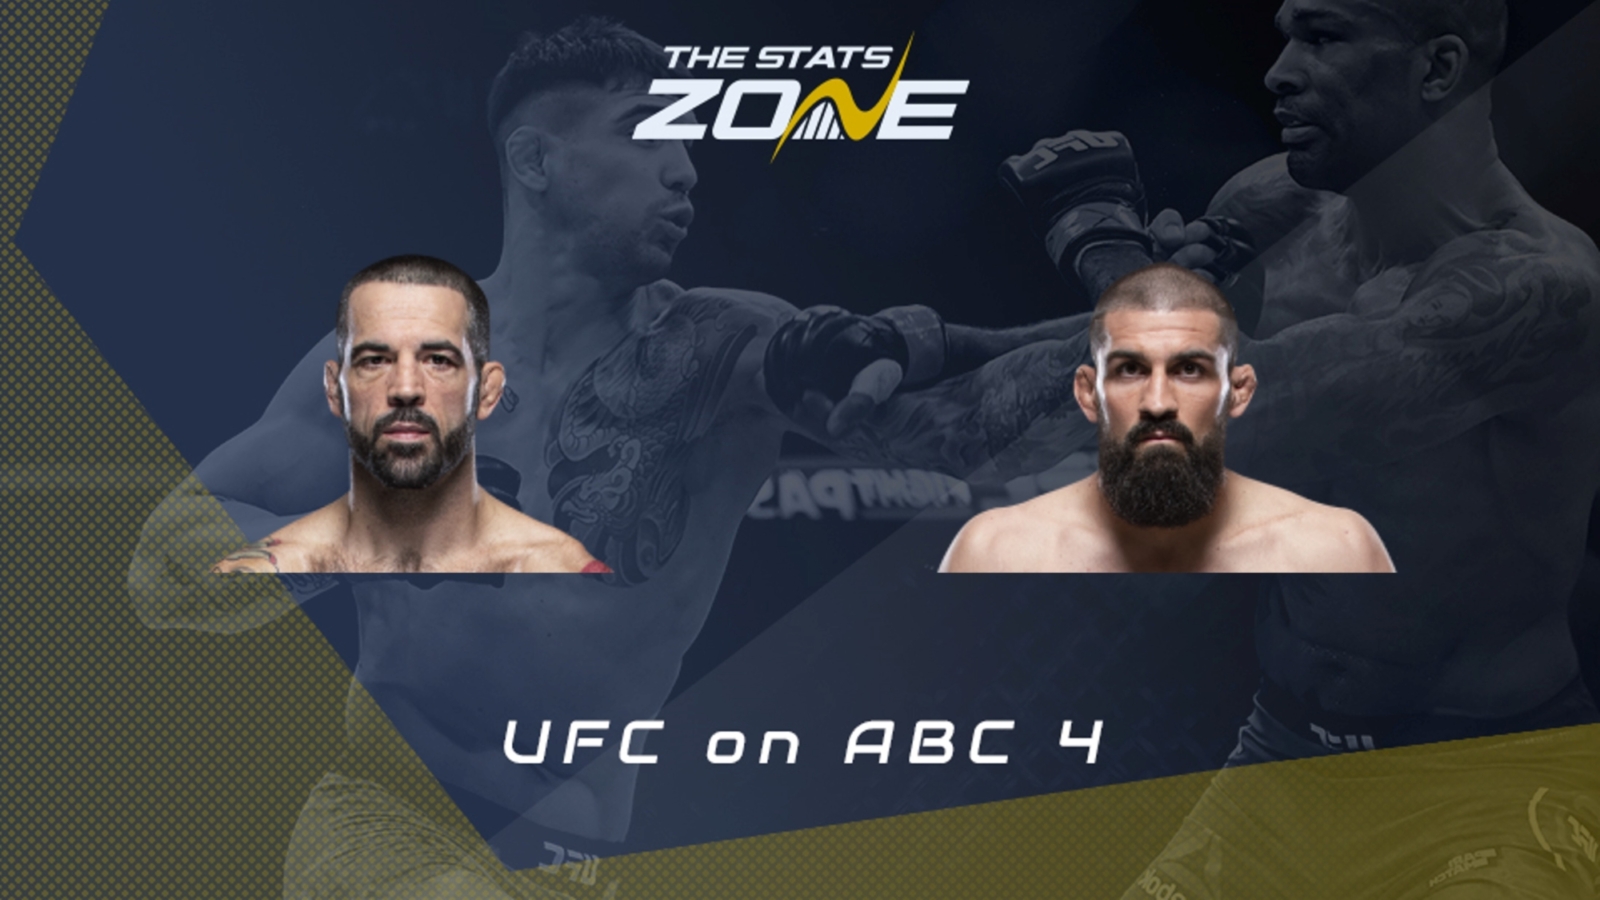 MMA Preview Matt Brown vs Court McGee at UFC on ABC 4 The Stats Zone